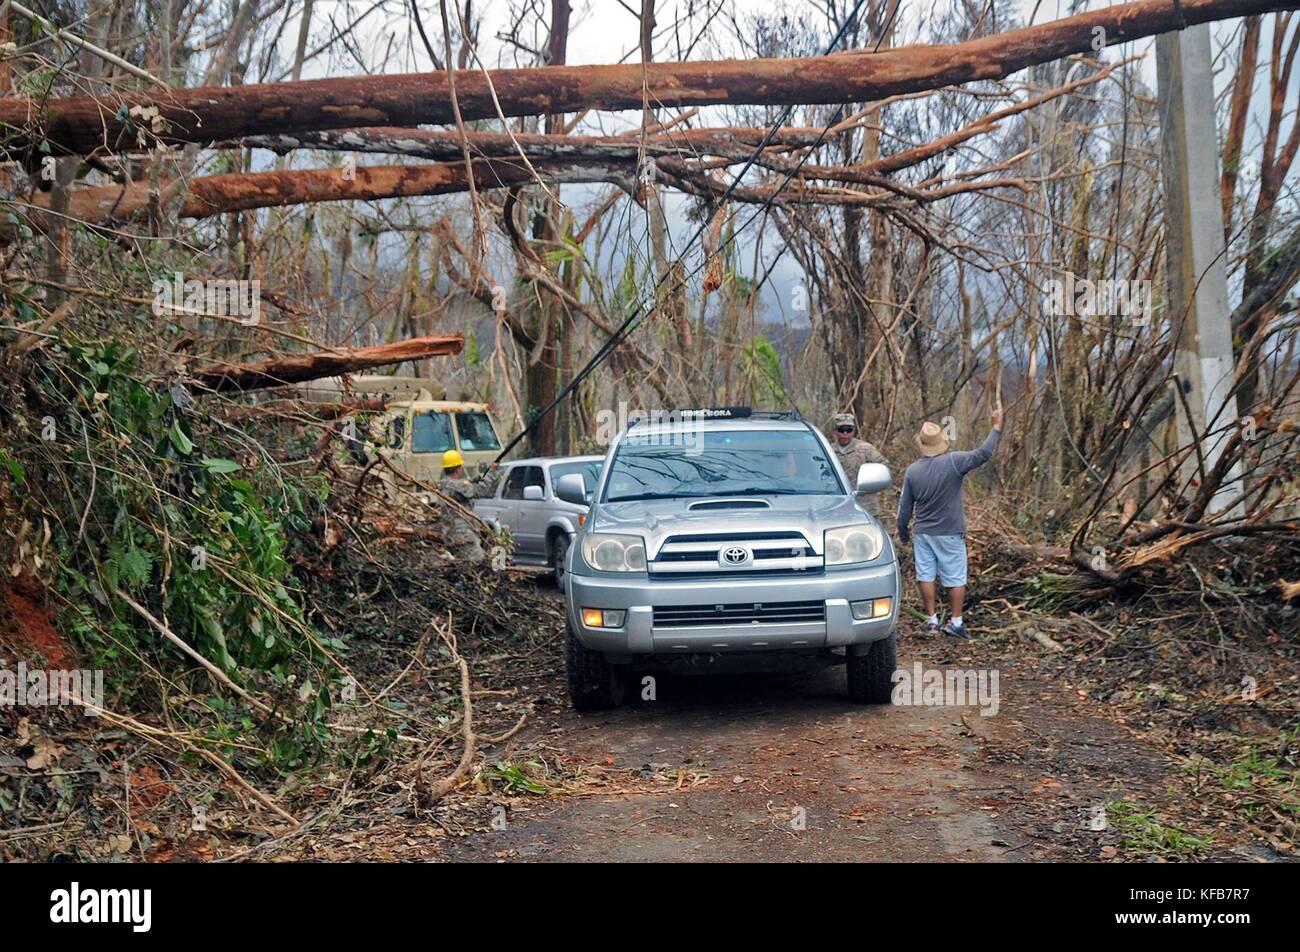 U.S. National Guard soldiers clear fallen trees and debris off a road during relief efforts in the aftermath of Hurricane Maria October 17, 2017 in Cayey, Puerto Rico.   (photo by Wilma Orozco Fanfan via Planetpix) Stock Photo